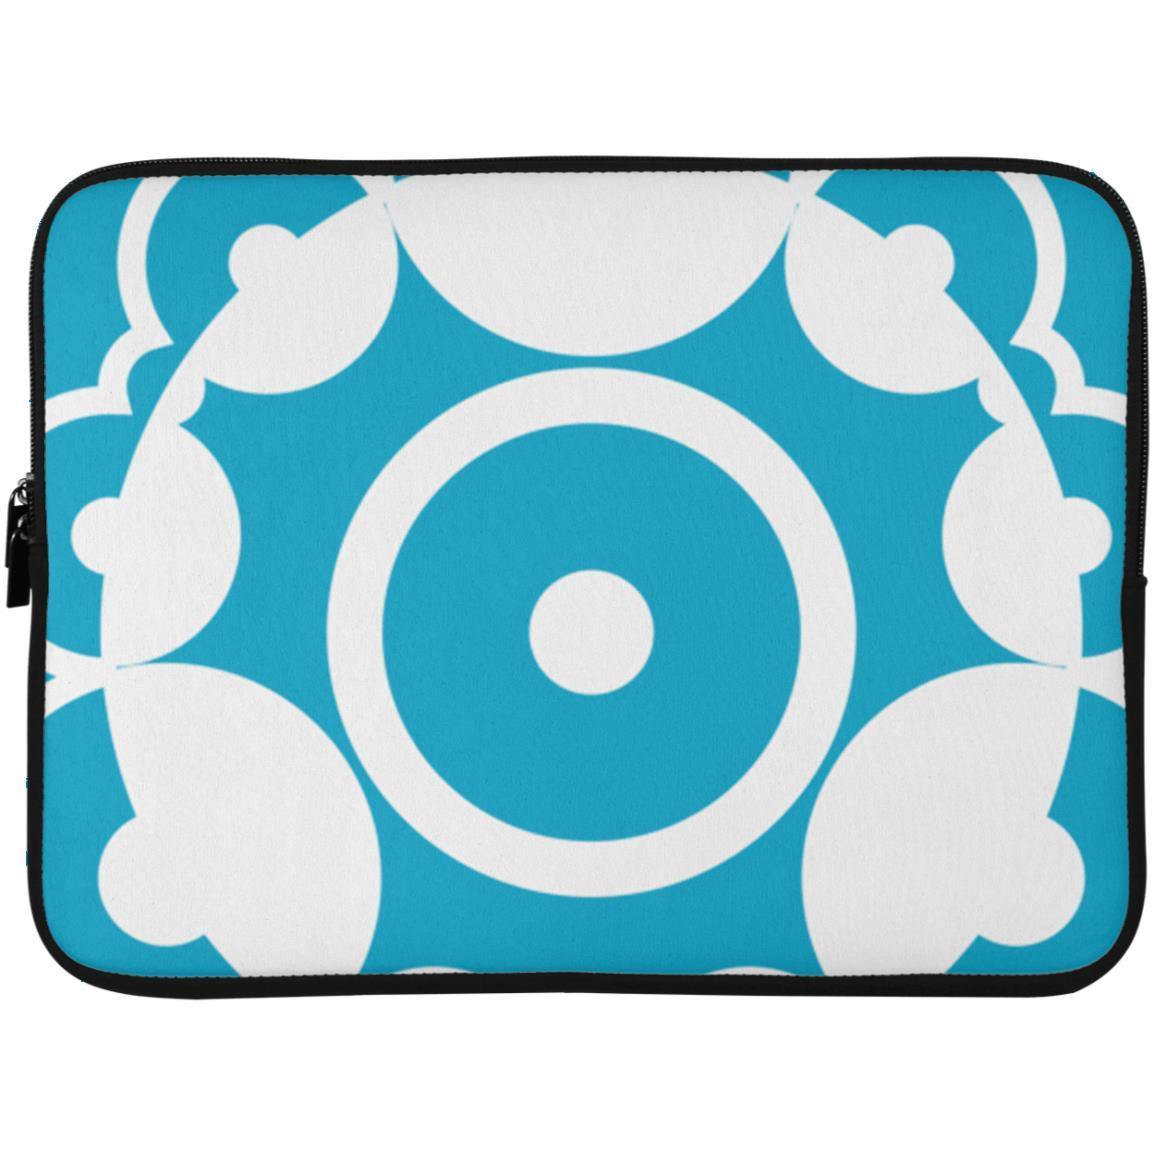 Crop Circle Laptop Sleeve - Clanfield - Shapes of Wisdom